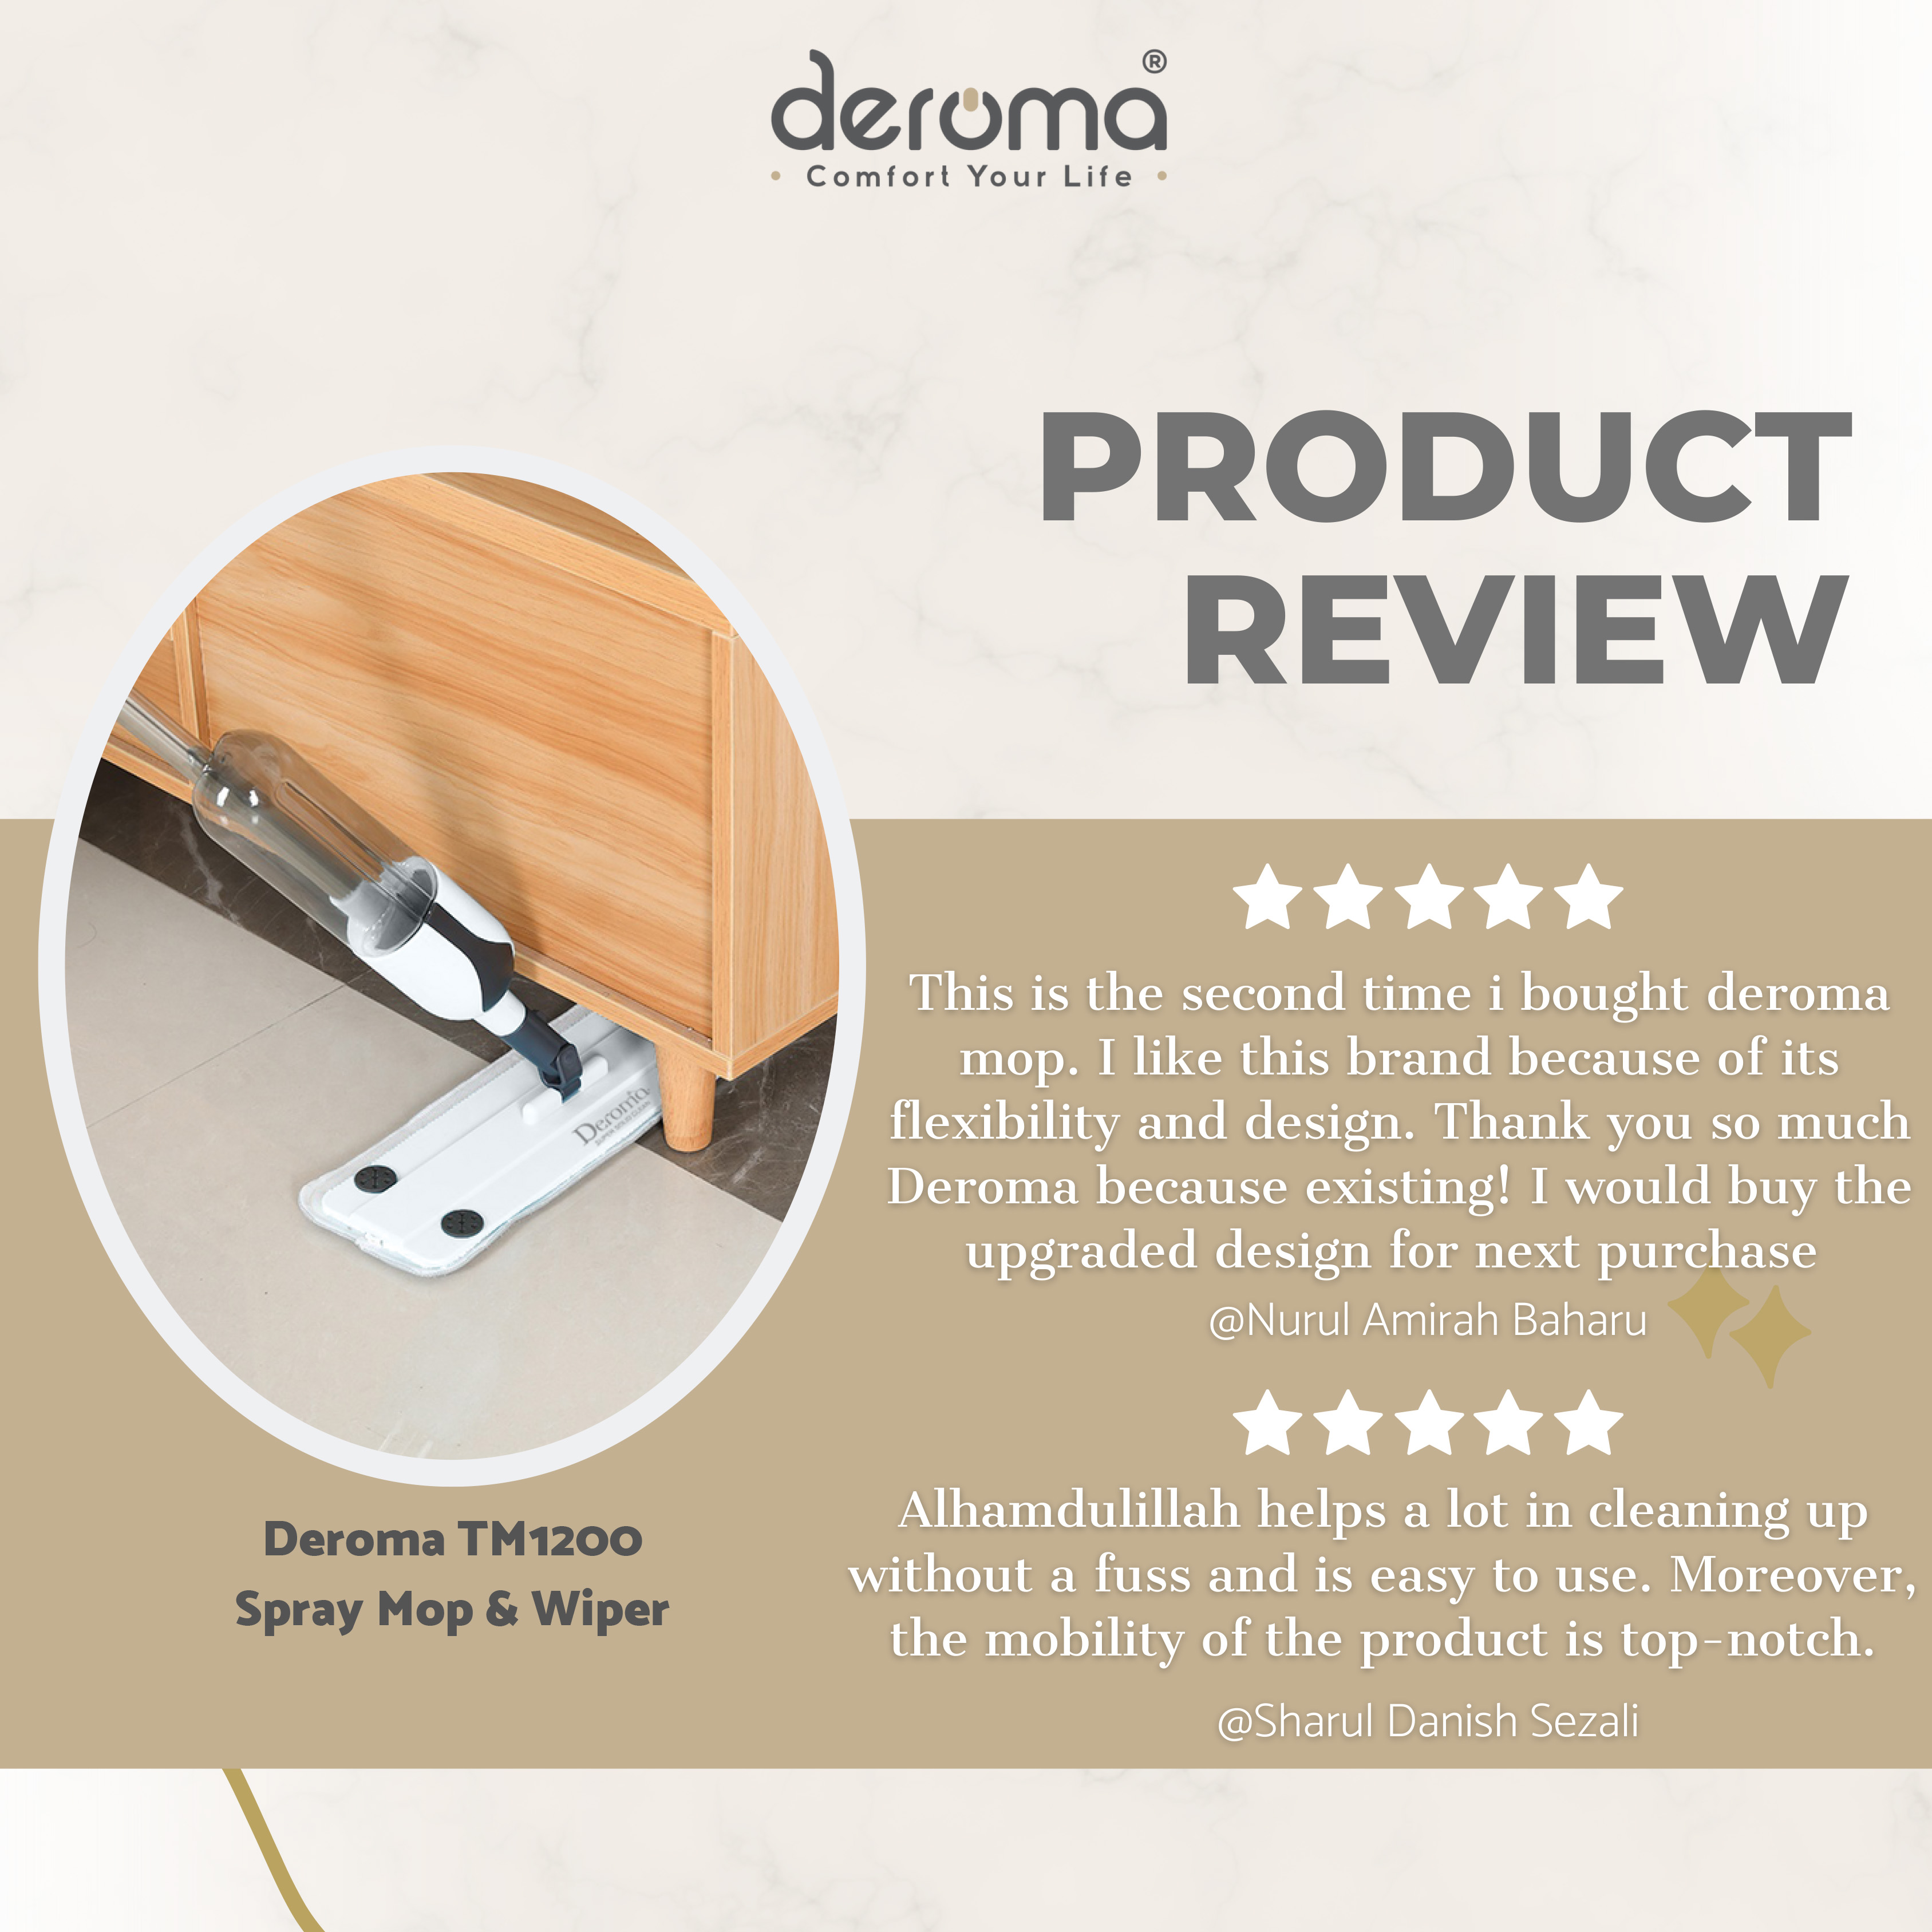 Deroma Product Review 4